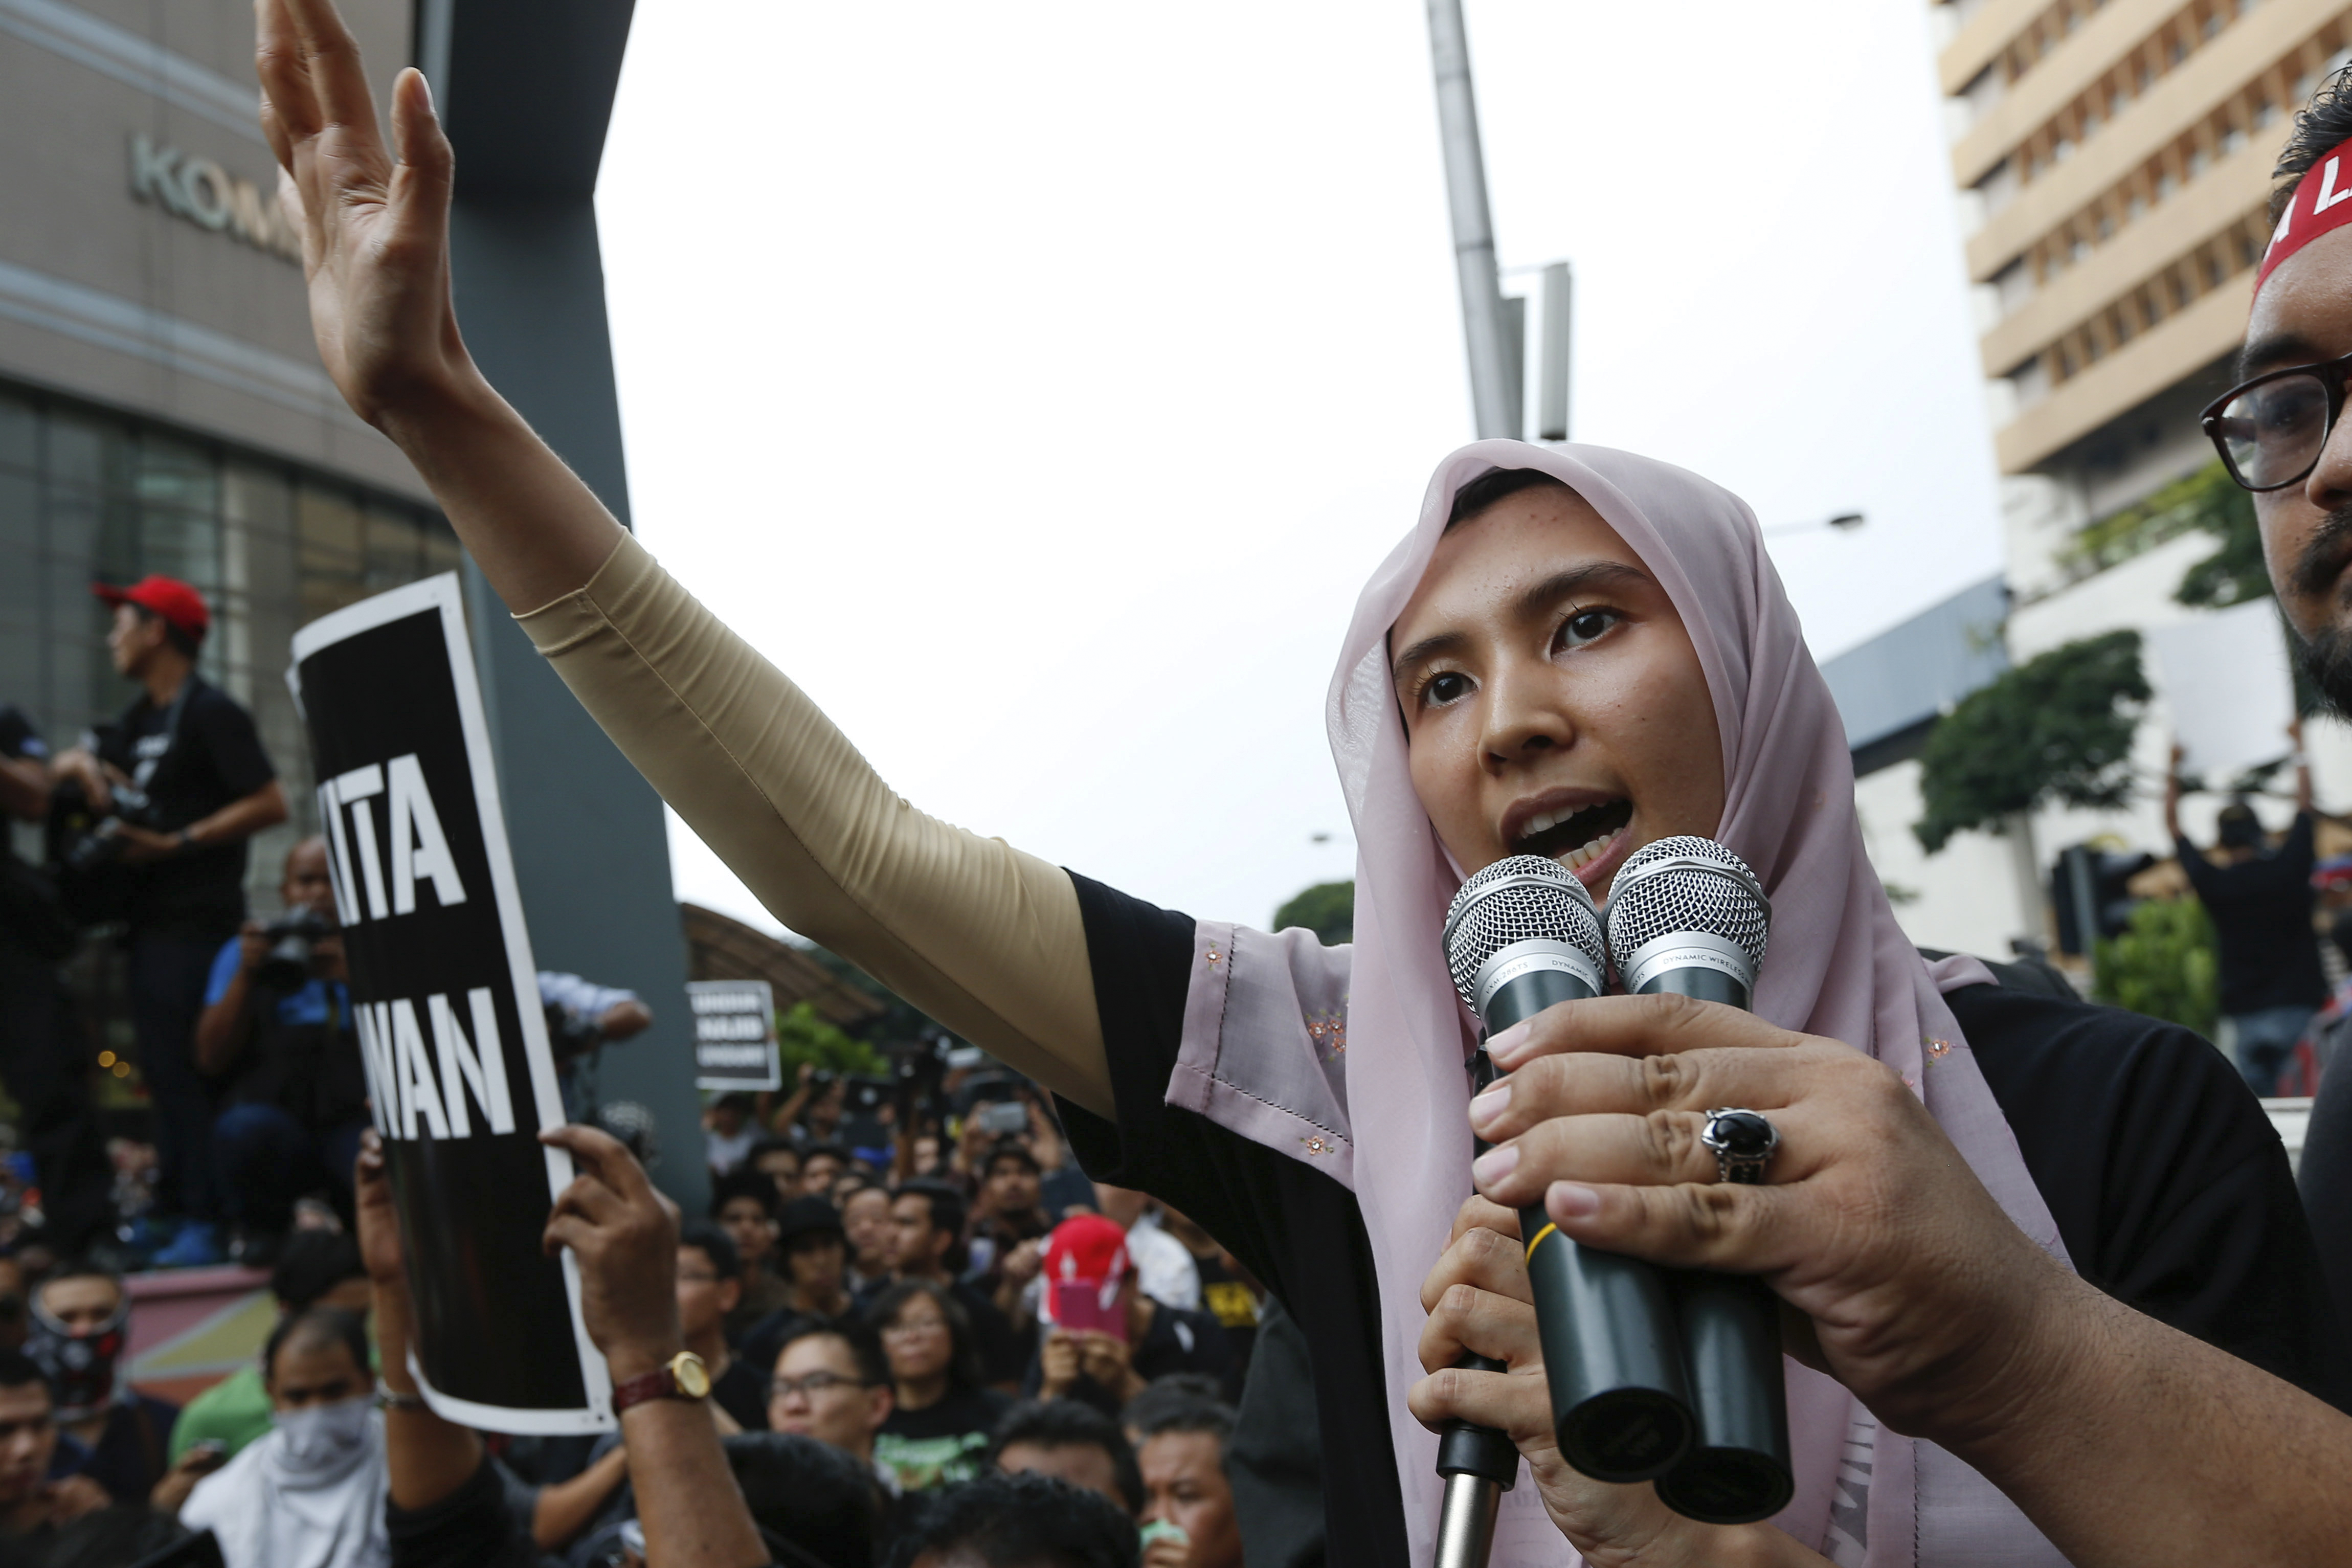 Nurul Izzah Anwar, lawmaker and vice president of the People's Justice Party, speaks to protesters as they gather to demand the freedom of her father Anwar Ibrahim in Kuala Lumpur on March 7, 2015 (Vincent Thian—AP)